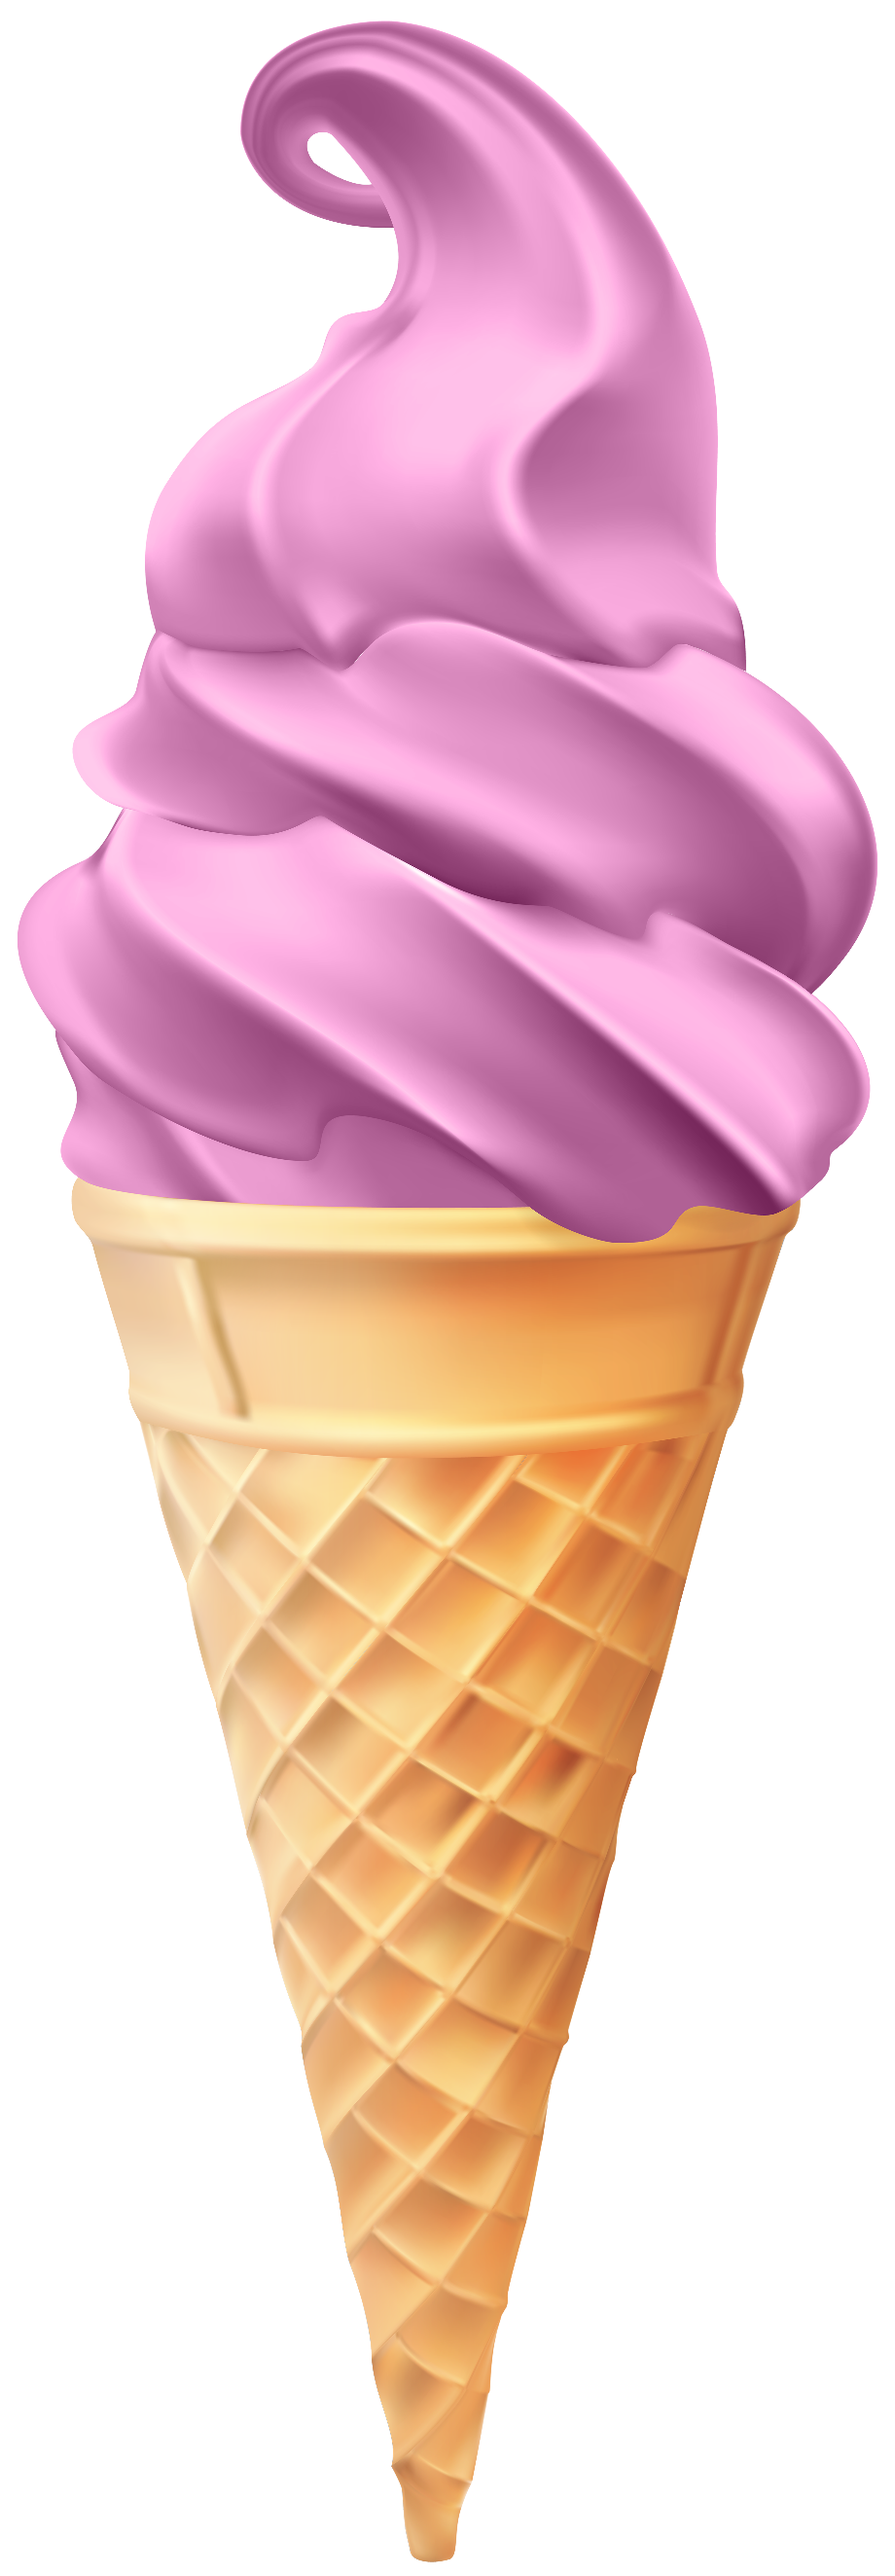 Download High Quality ice cream cone clip art pink Transparent PNG